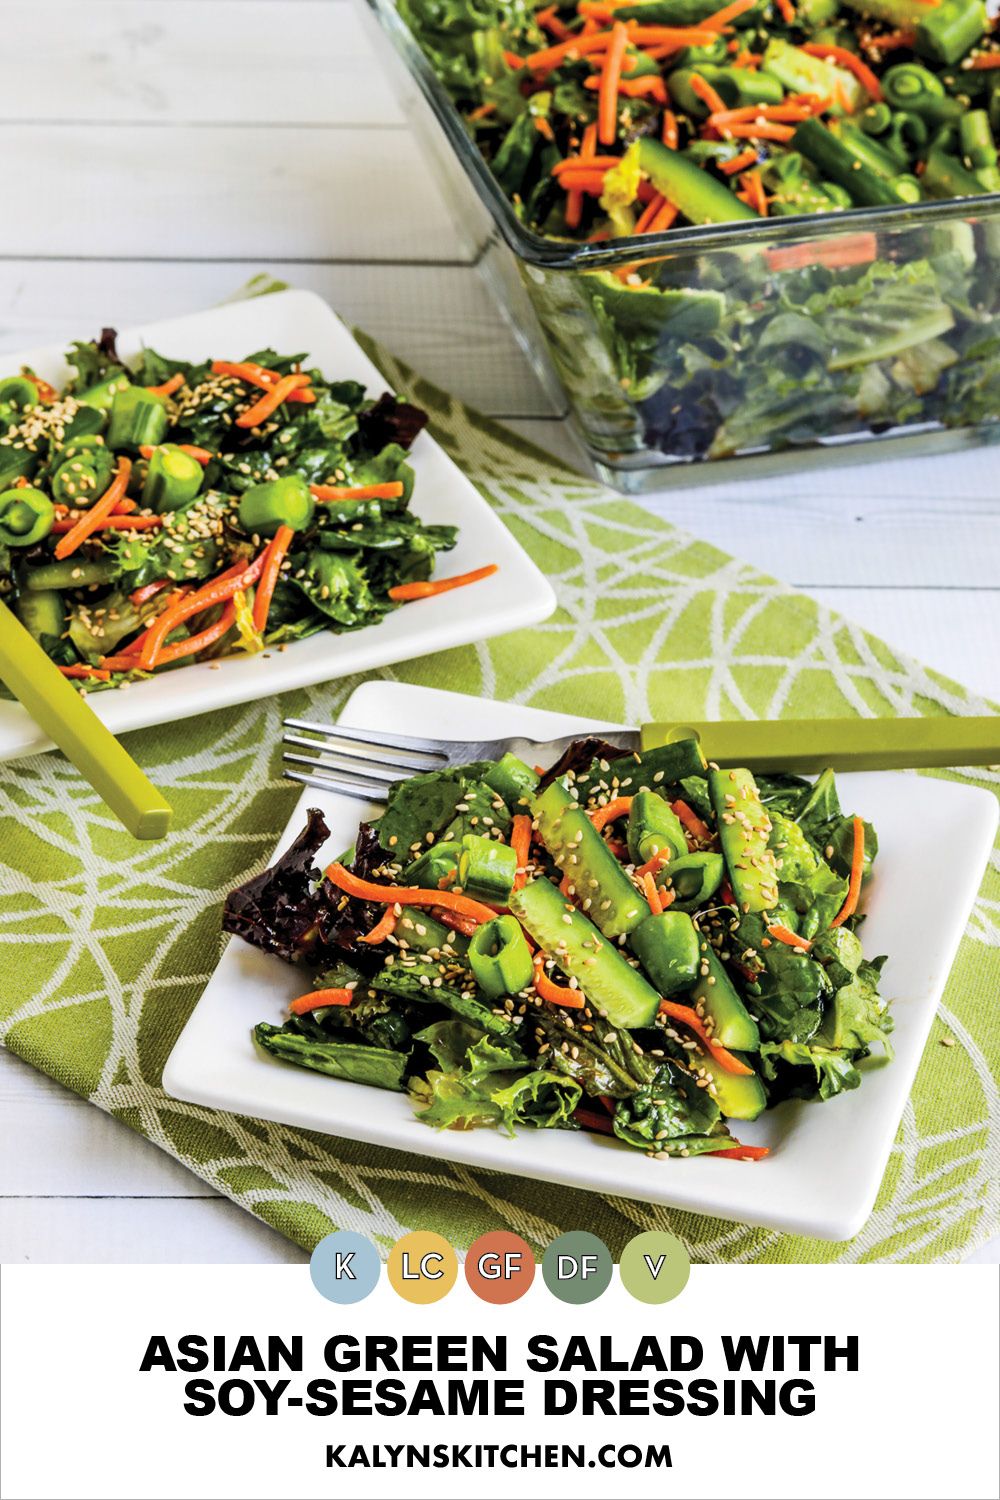 Pinterest image for Asian Green Salad with Soy-Sesame Dressing